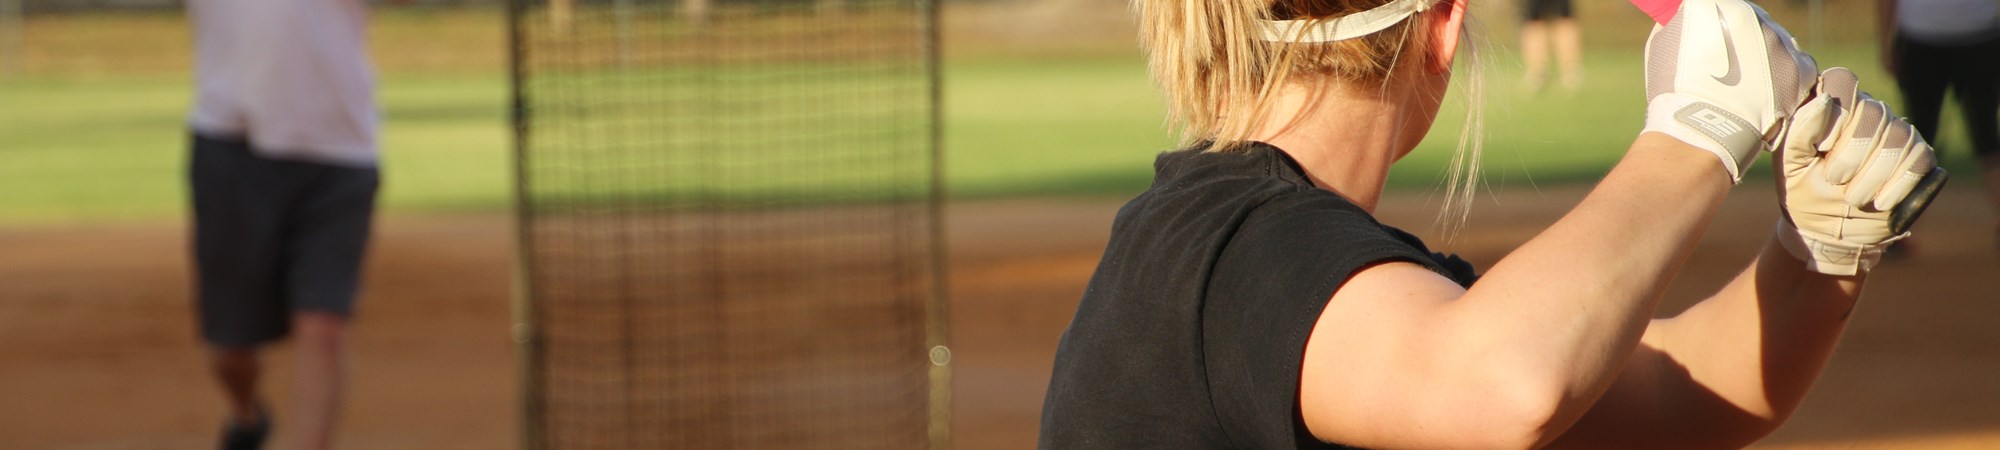 Softball field at Sunset, woman in the foreground with a bat about to swing